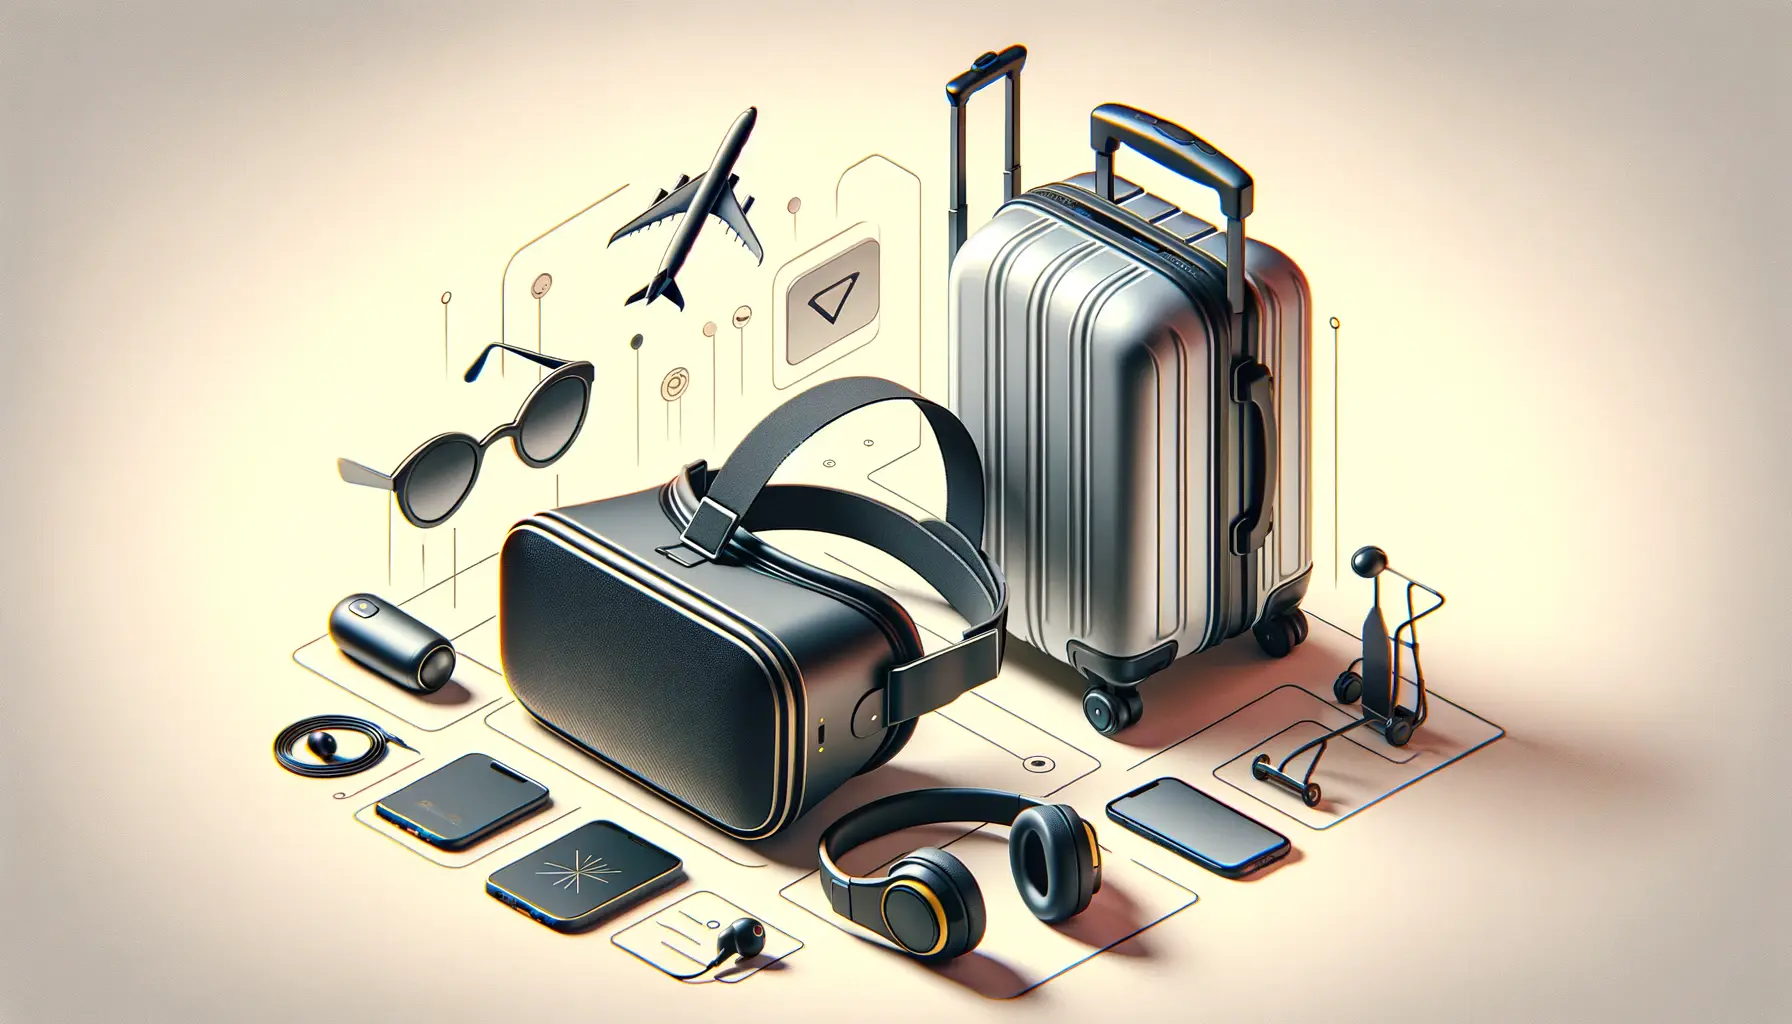 Quest 3 Portability: Traveling with VR